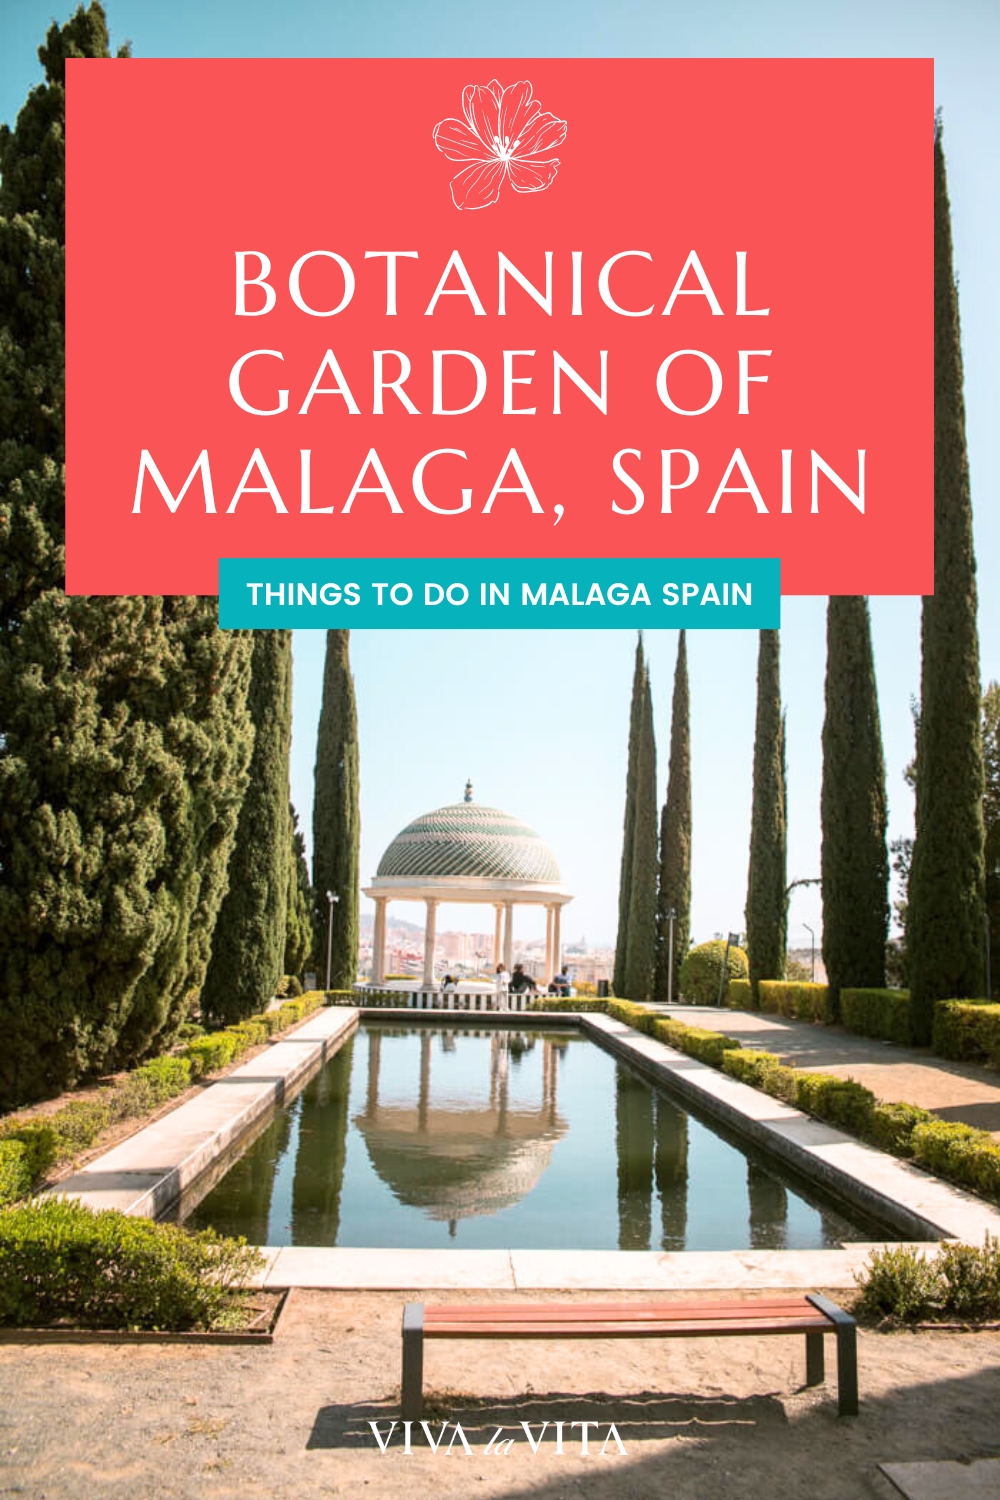 pinterest image showing the botanical garden of malaga with a headline: botanical garden of malaga, spain - things to do in malaga spain